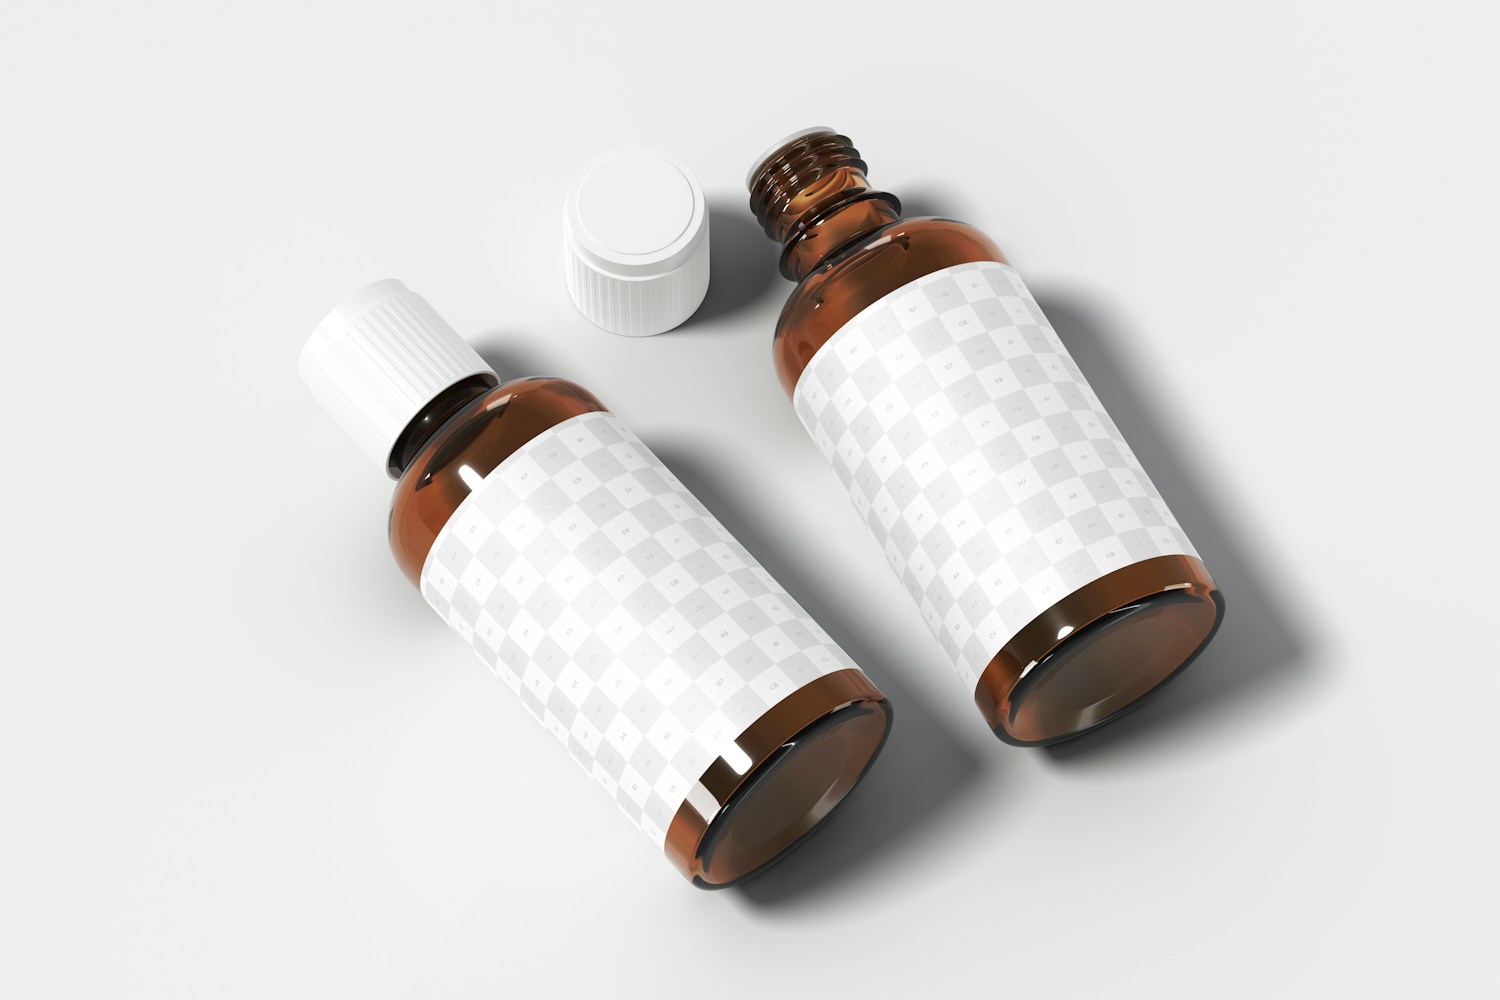 Euro Dropper Bottles with Orifice Reducers Mockup, Perspective